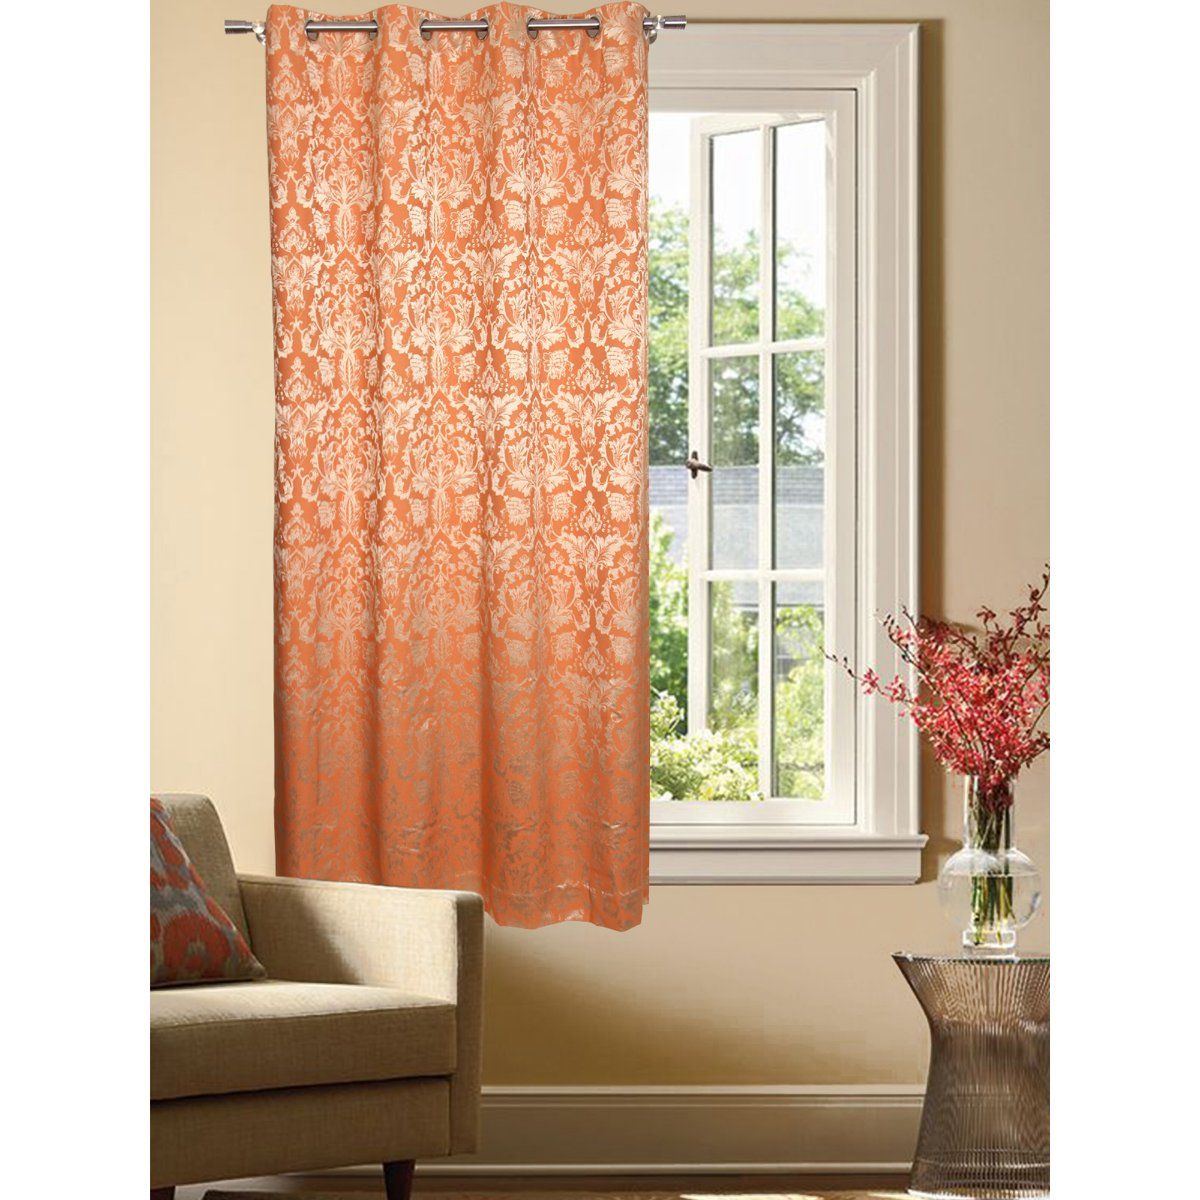 Sivya By Home Cotton Jacquard Self Design 5 Feet Window Orange Curtain At Nykaa Best Beauty Products Online